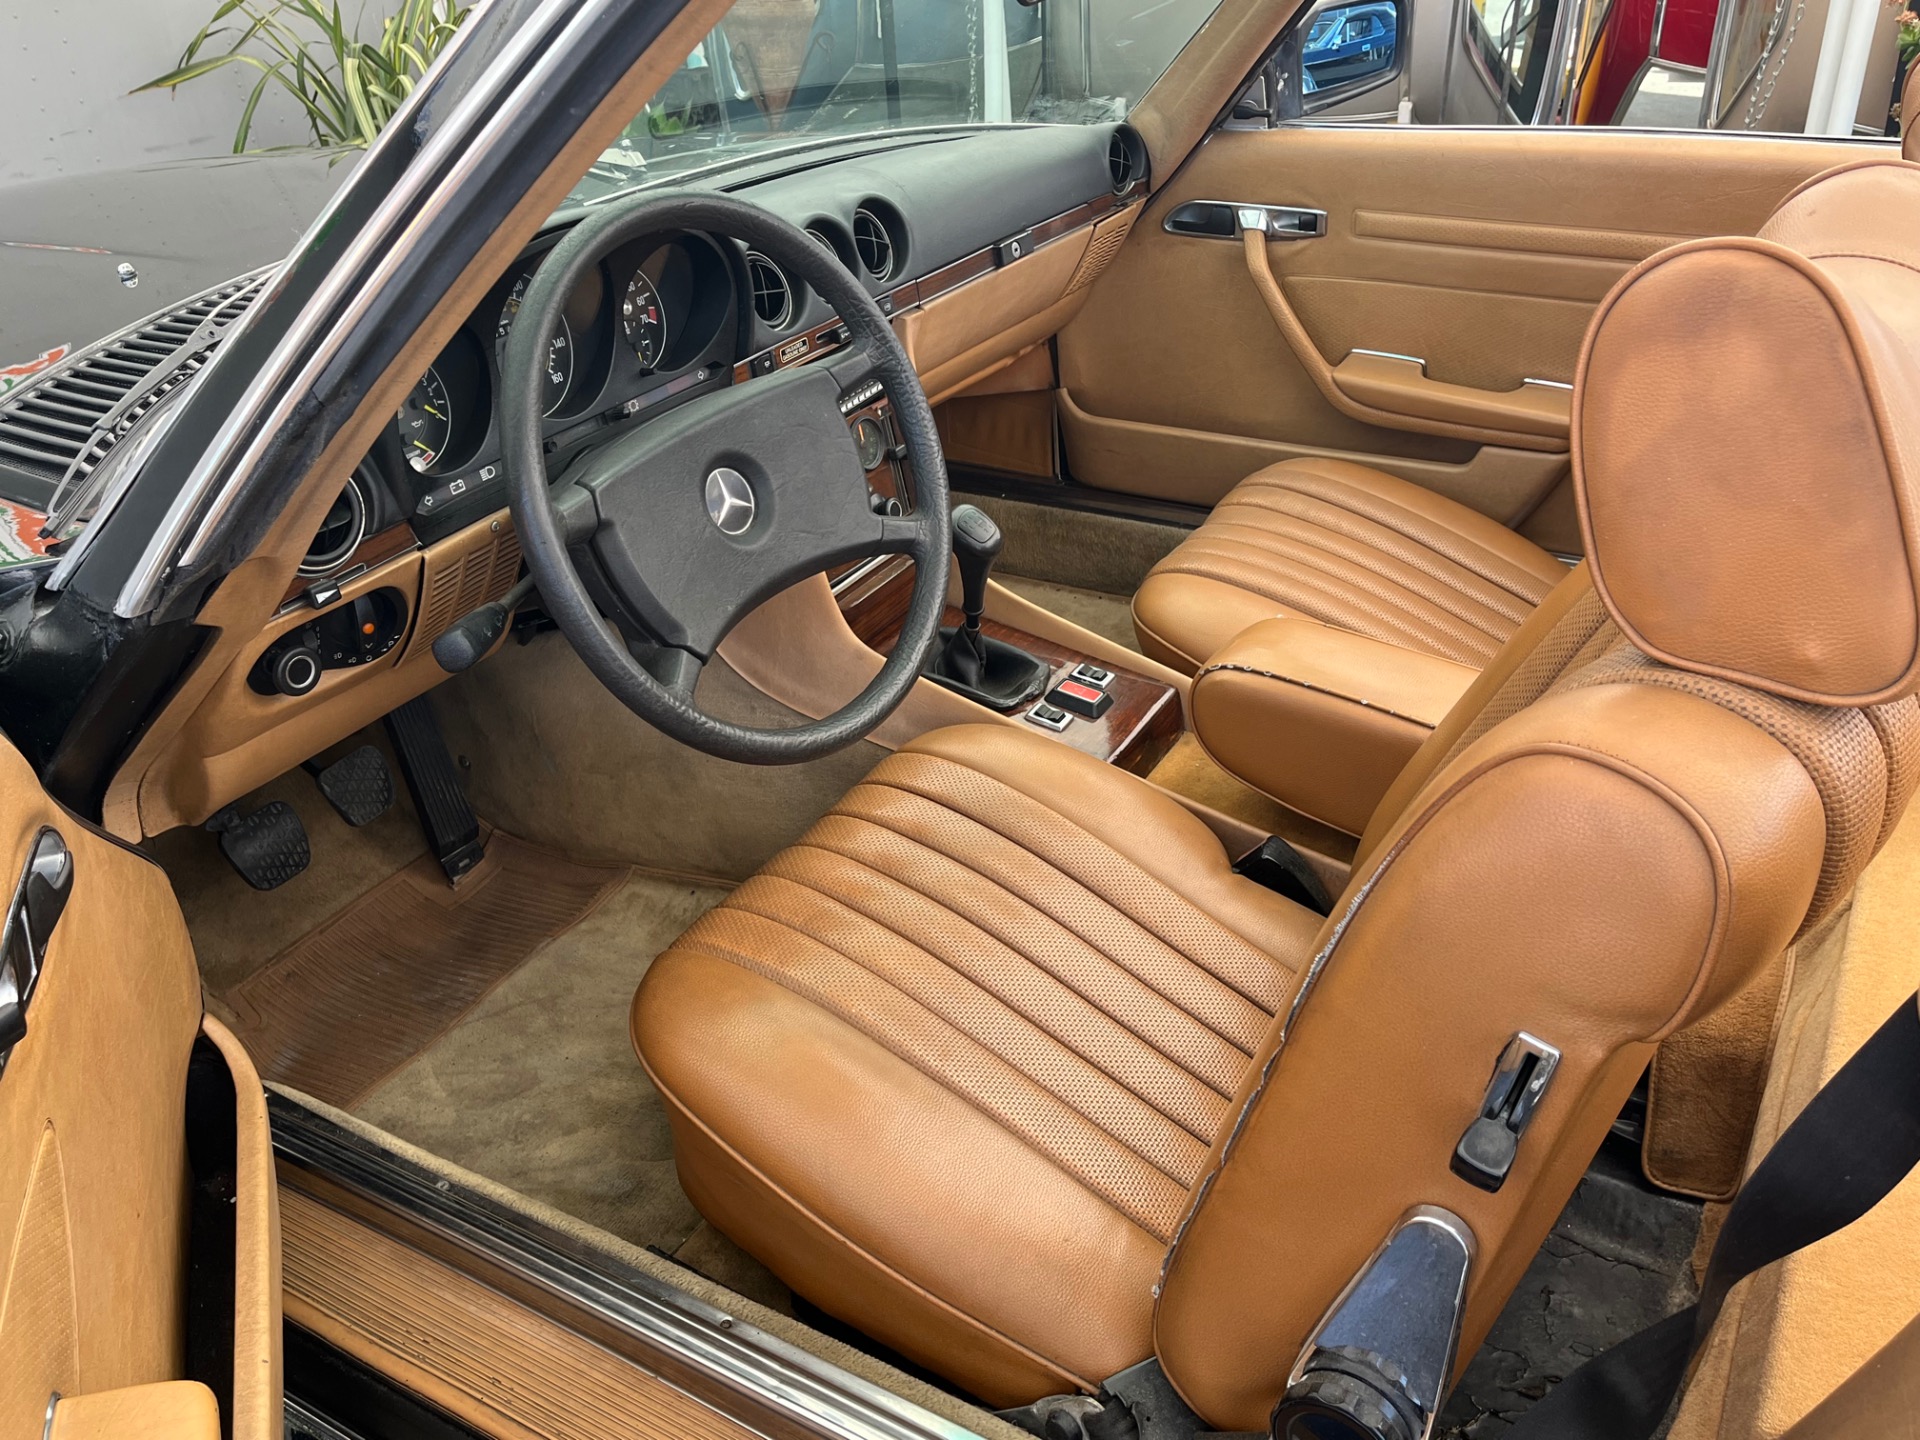 Used 1980 Mercedes Benz 280 Class 280 SL